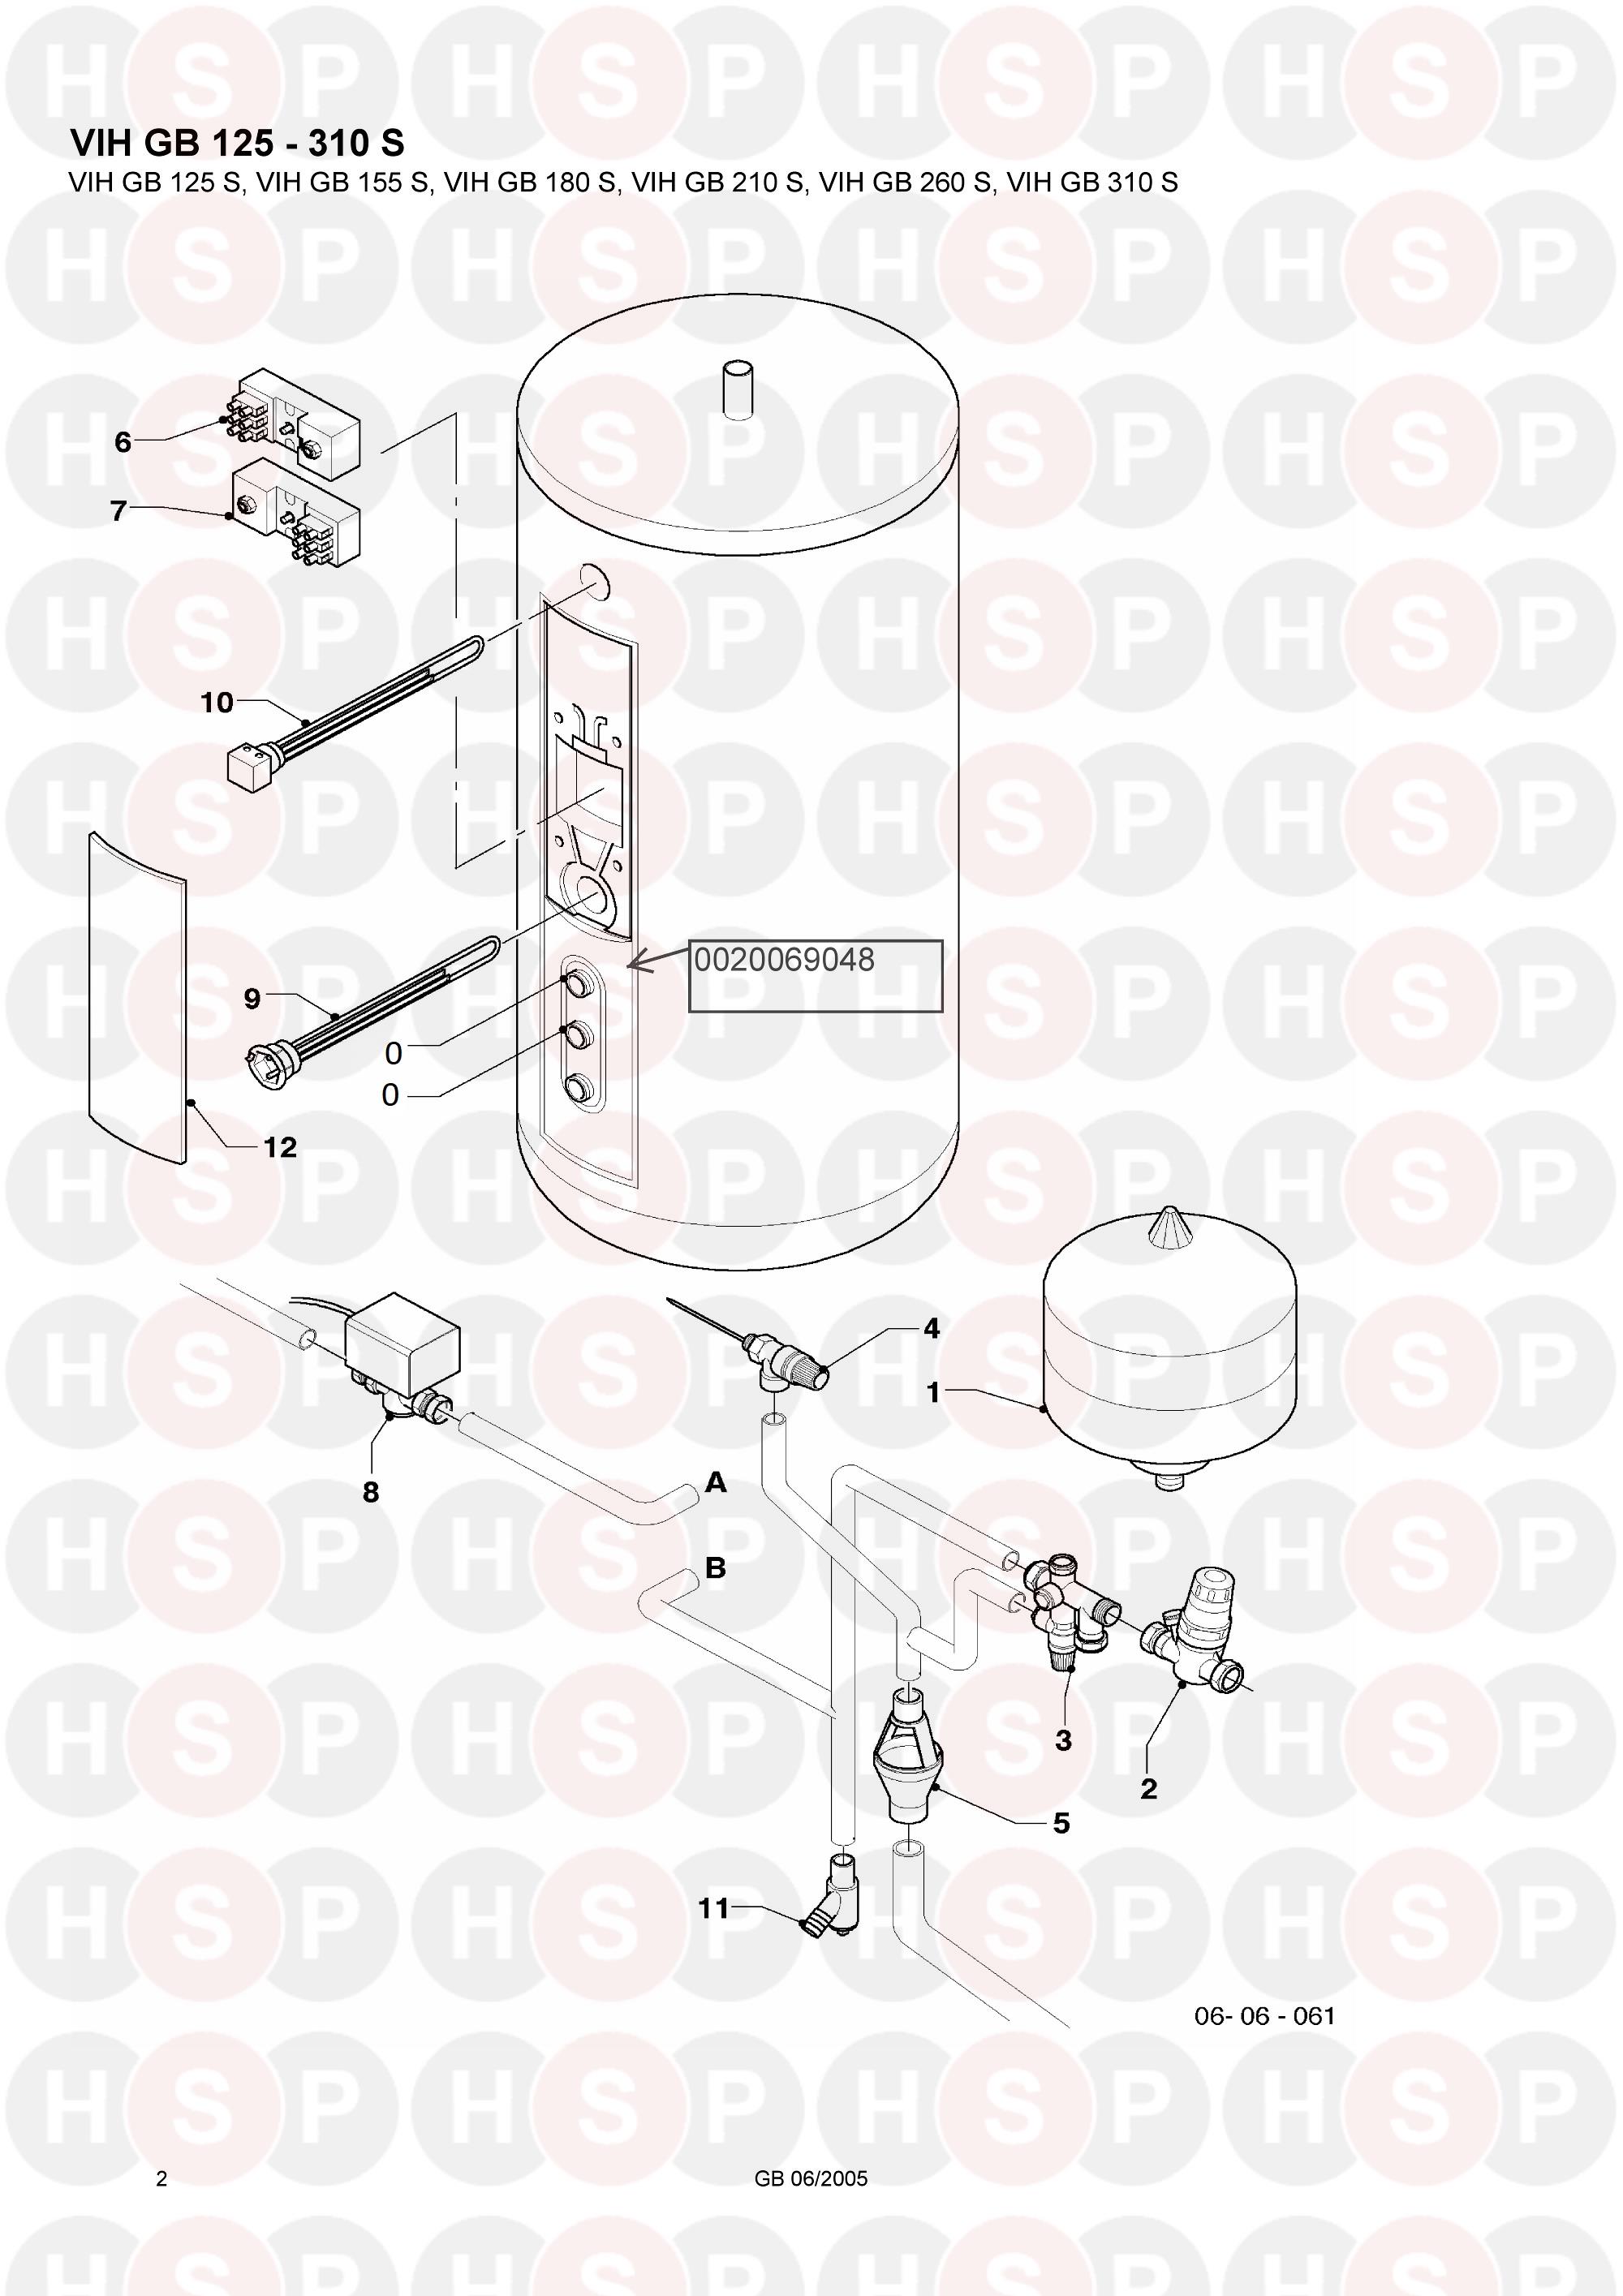 Exploded View Storage Water Heater diagram for Vaillant Unistor VIH GB 310 S